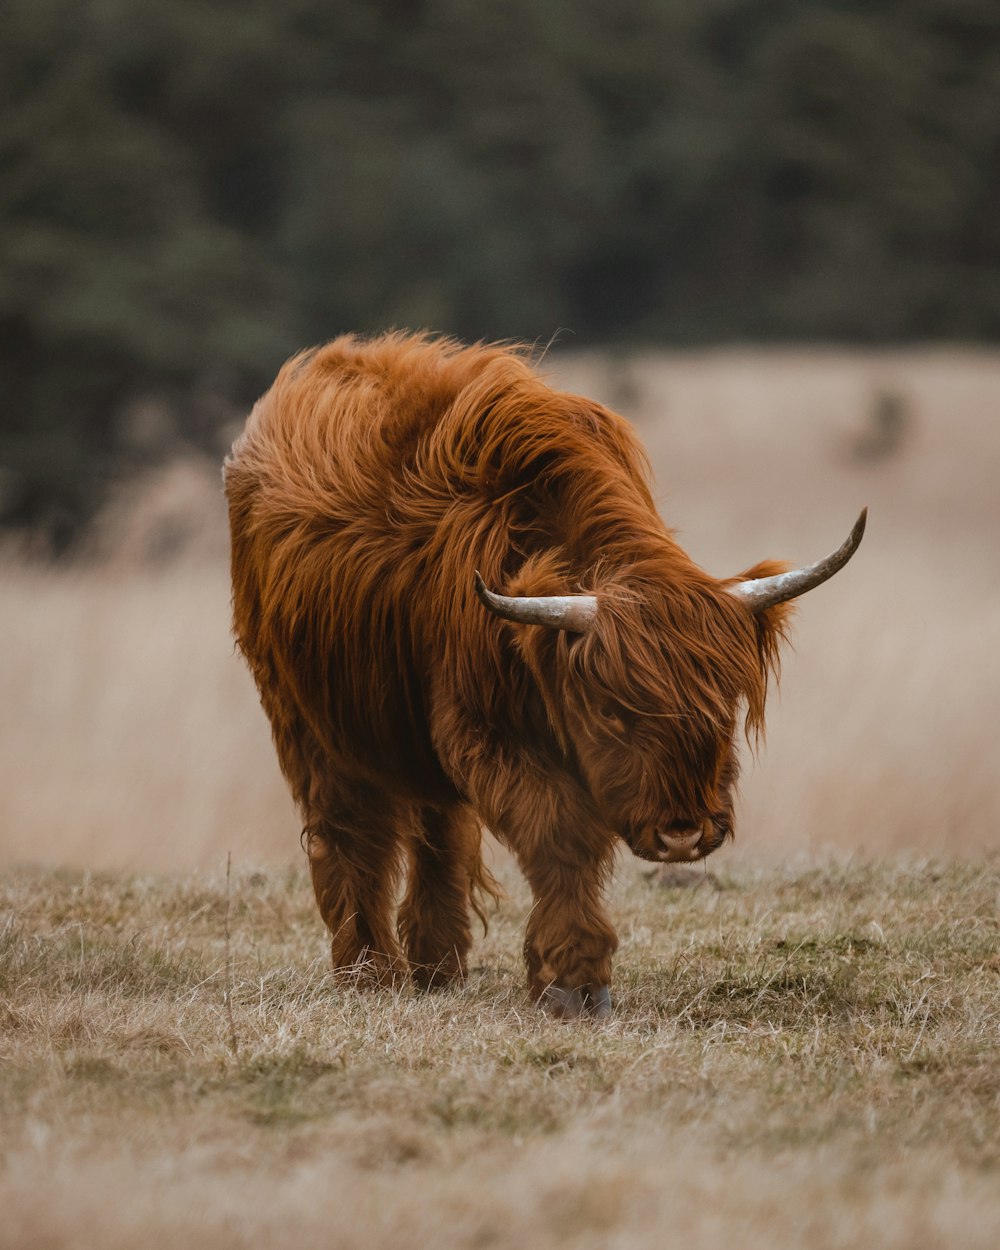 a long haired bull with horns walking through a field